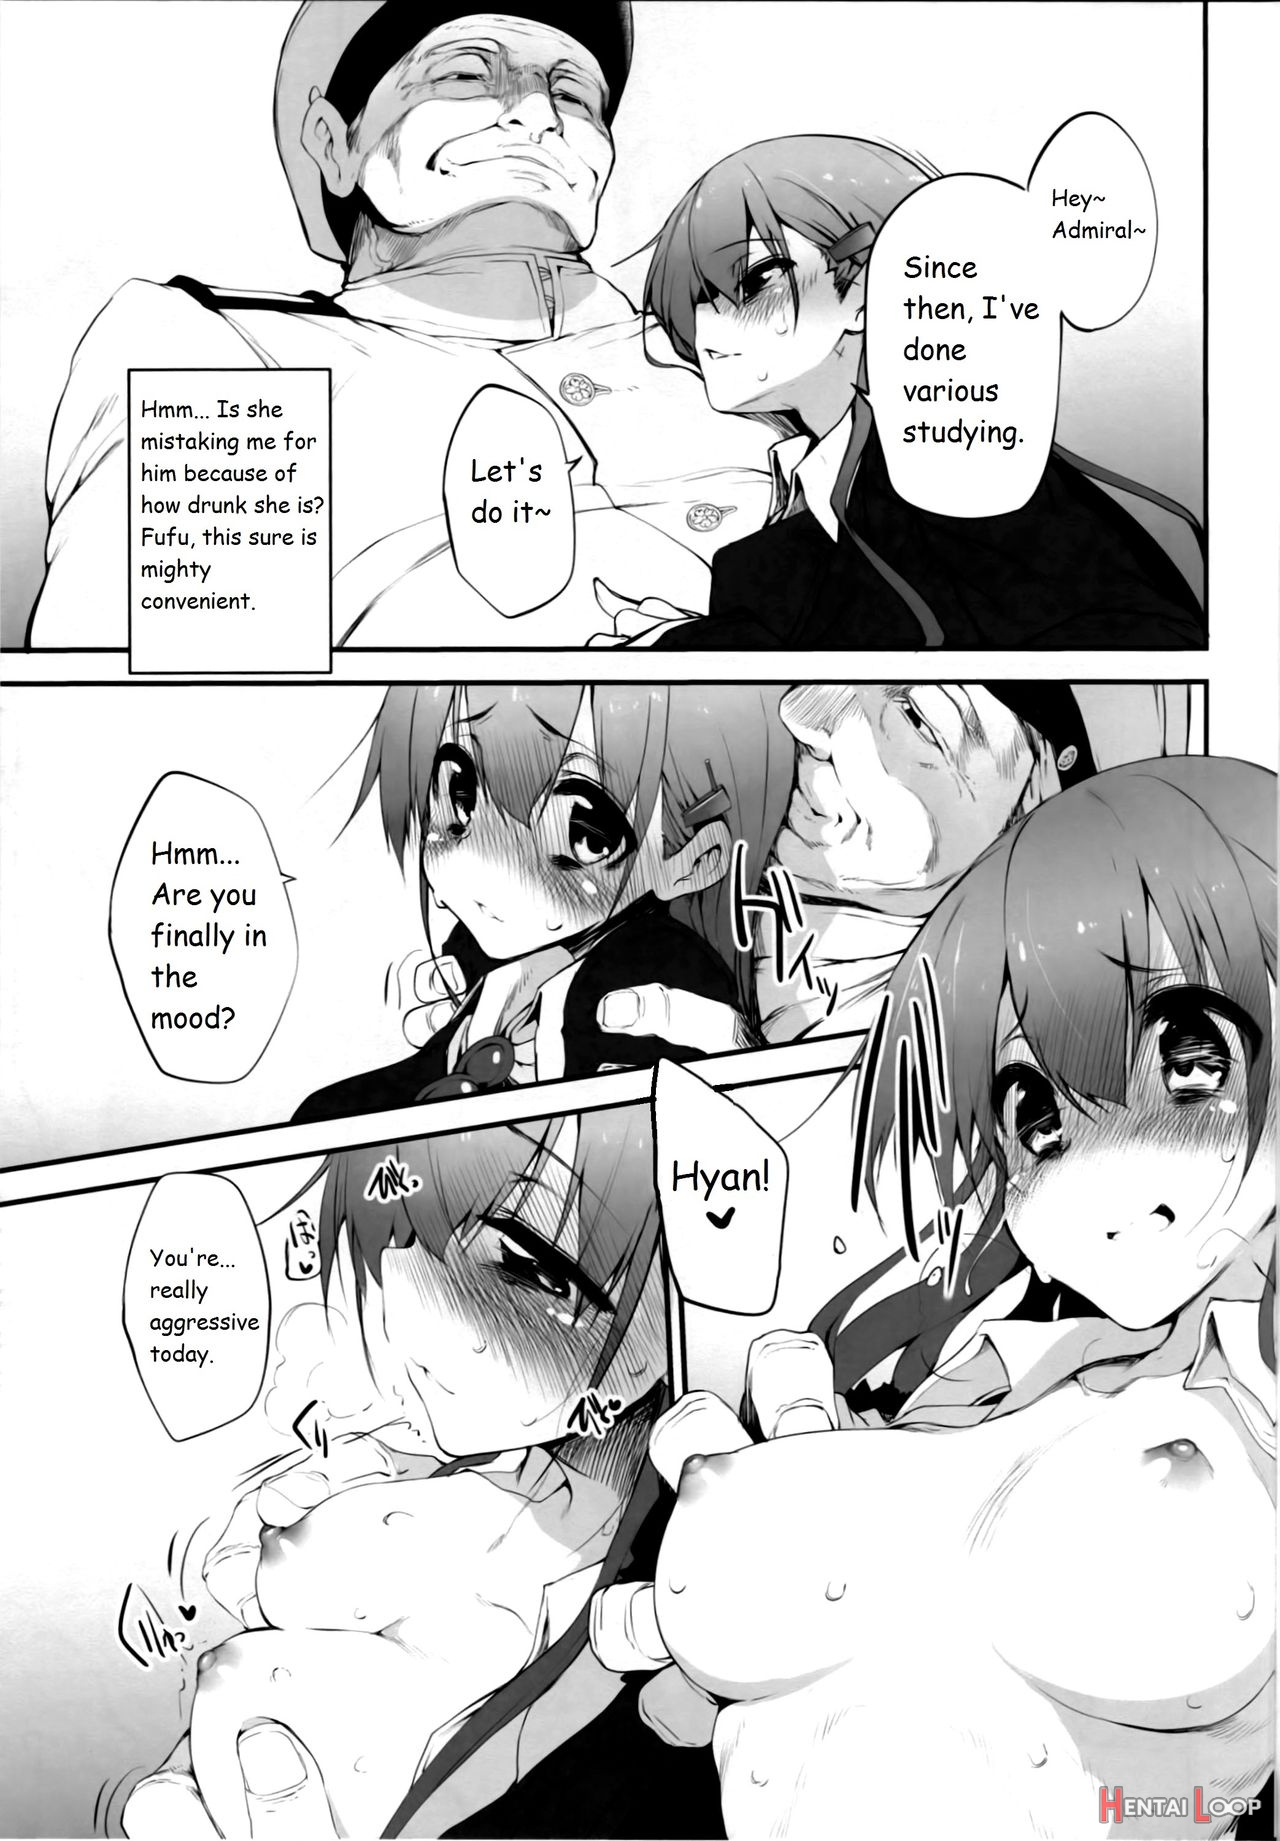 Marked Girls Vol. 1 page 7